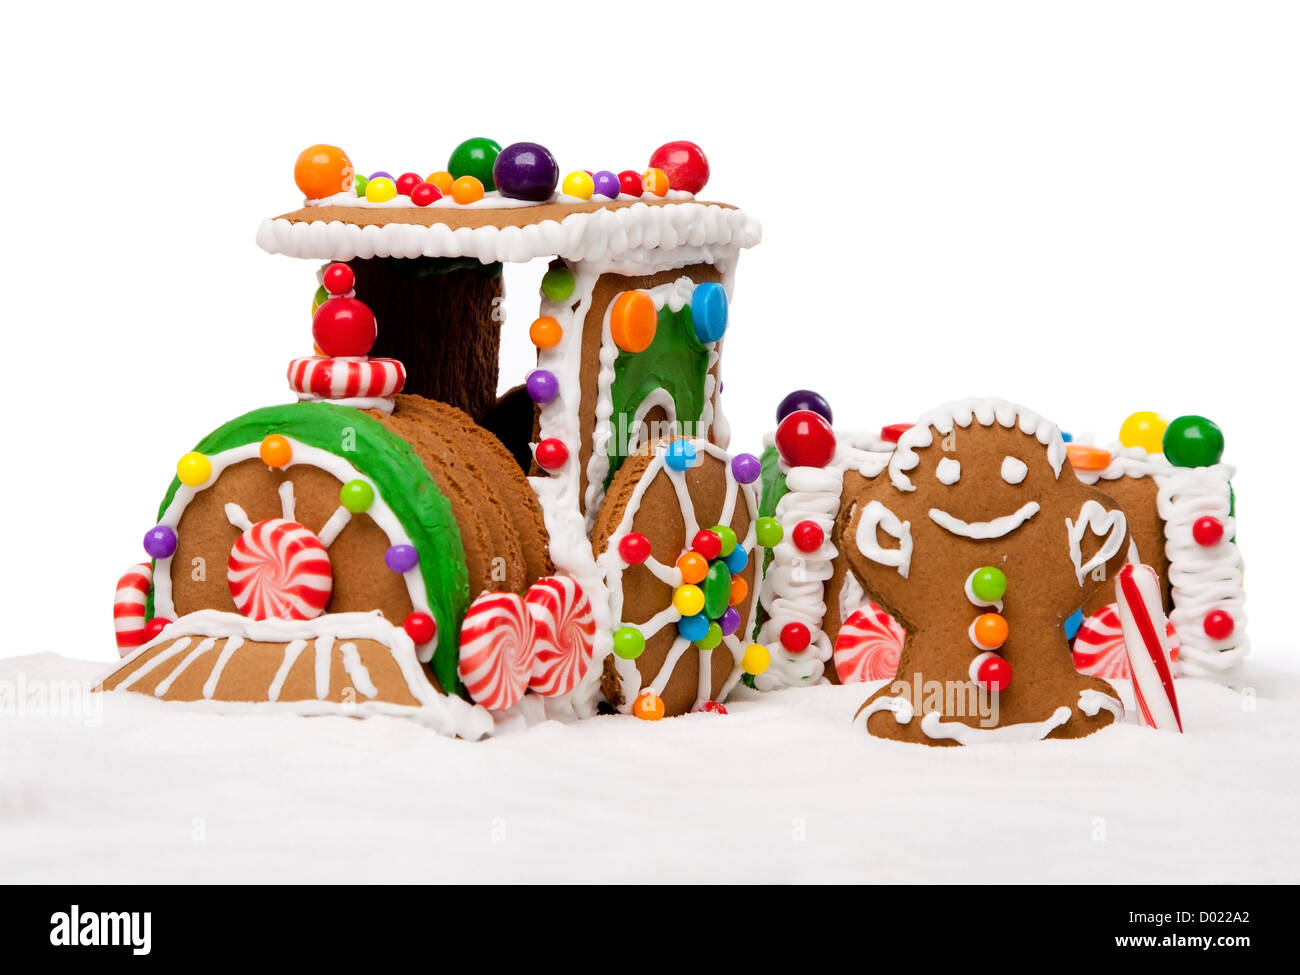 Gingerbread Polar Express Train and happy man for Christmas covered with snow and colorful candy on a winter landscape, isolated Stock Photo